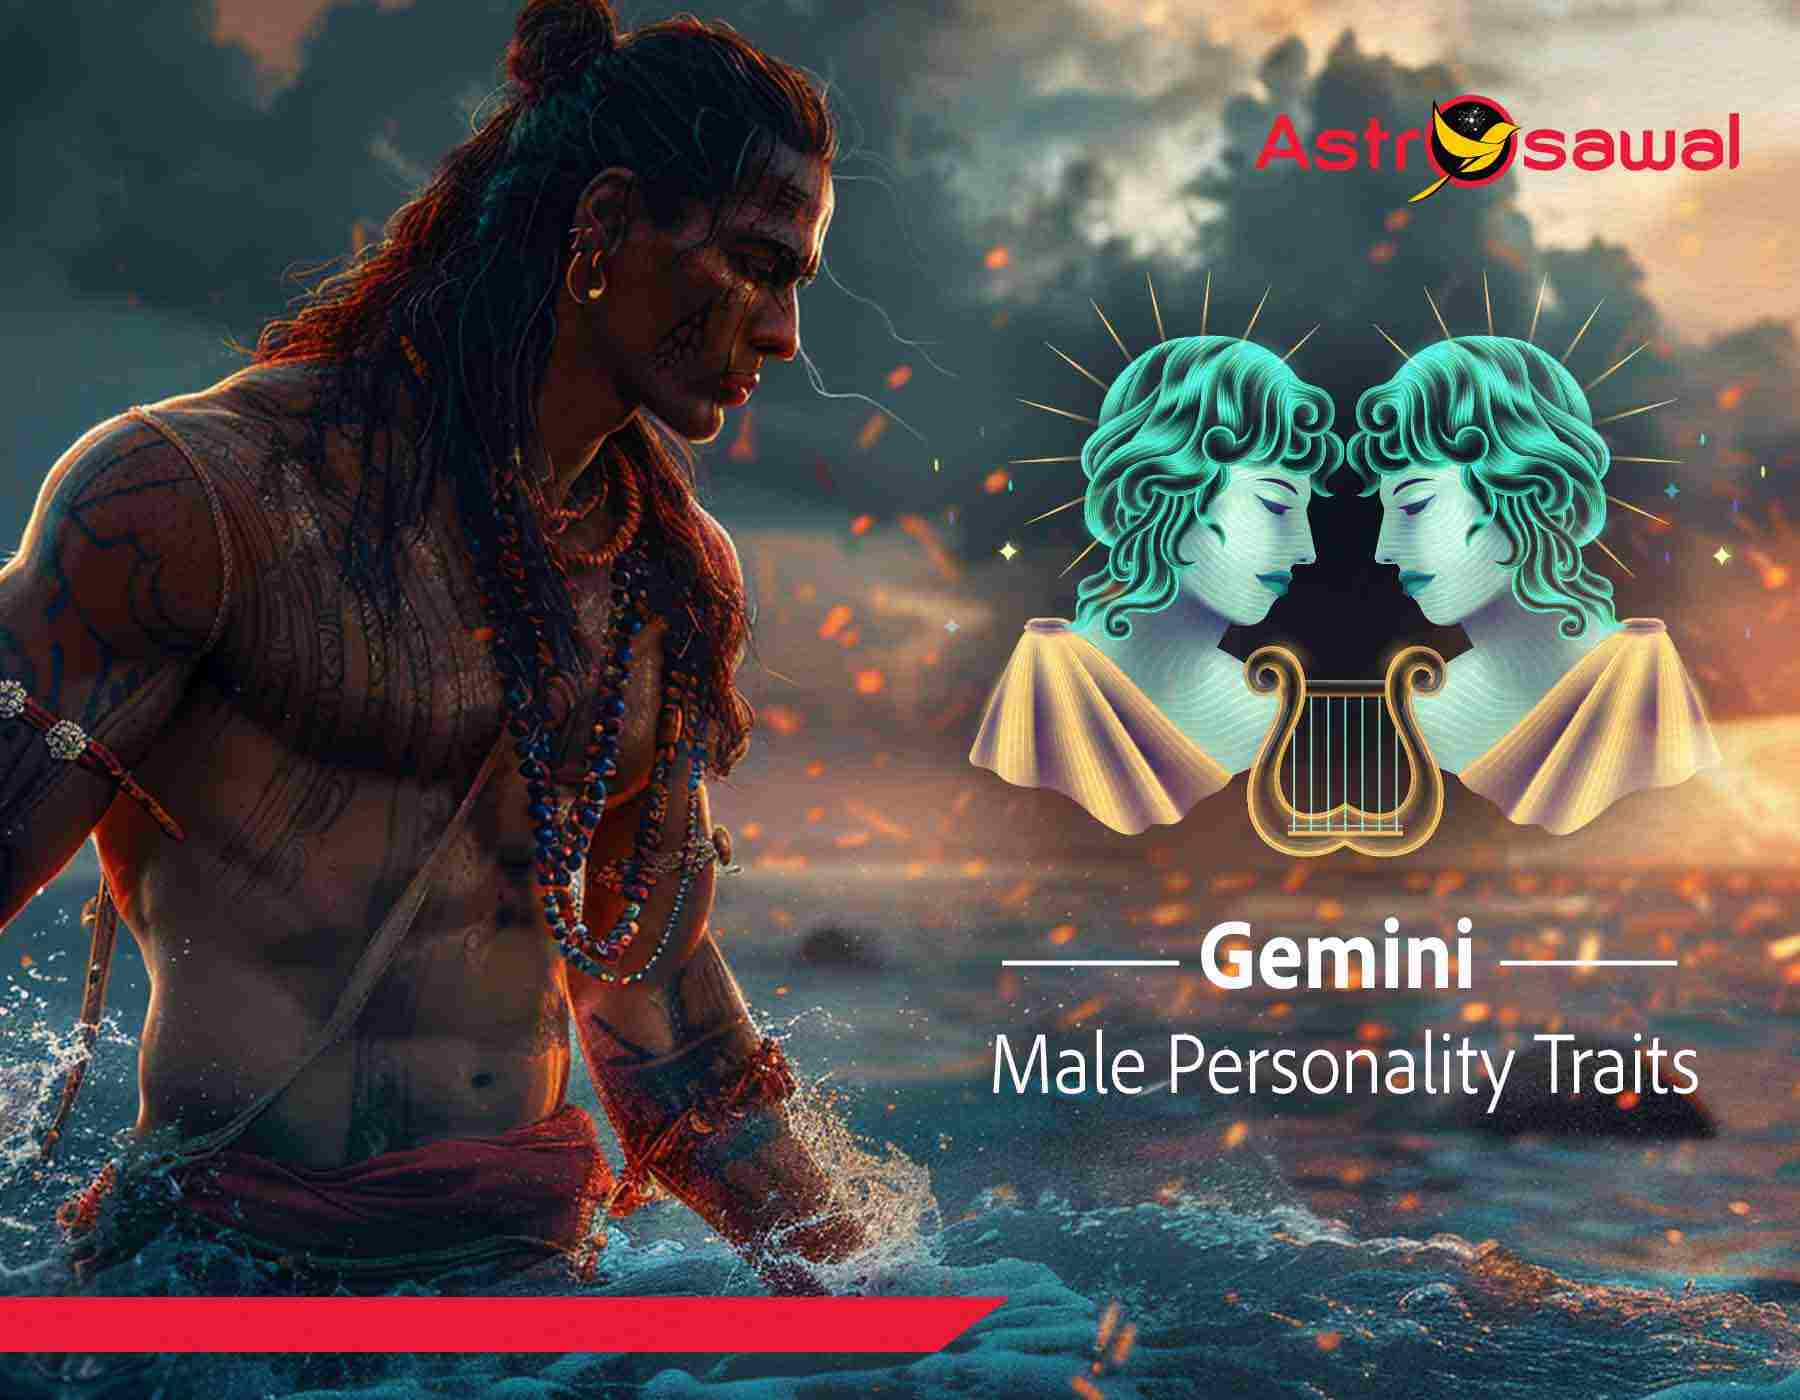 Everything You Need to Know About Dating a Gemini Man